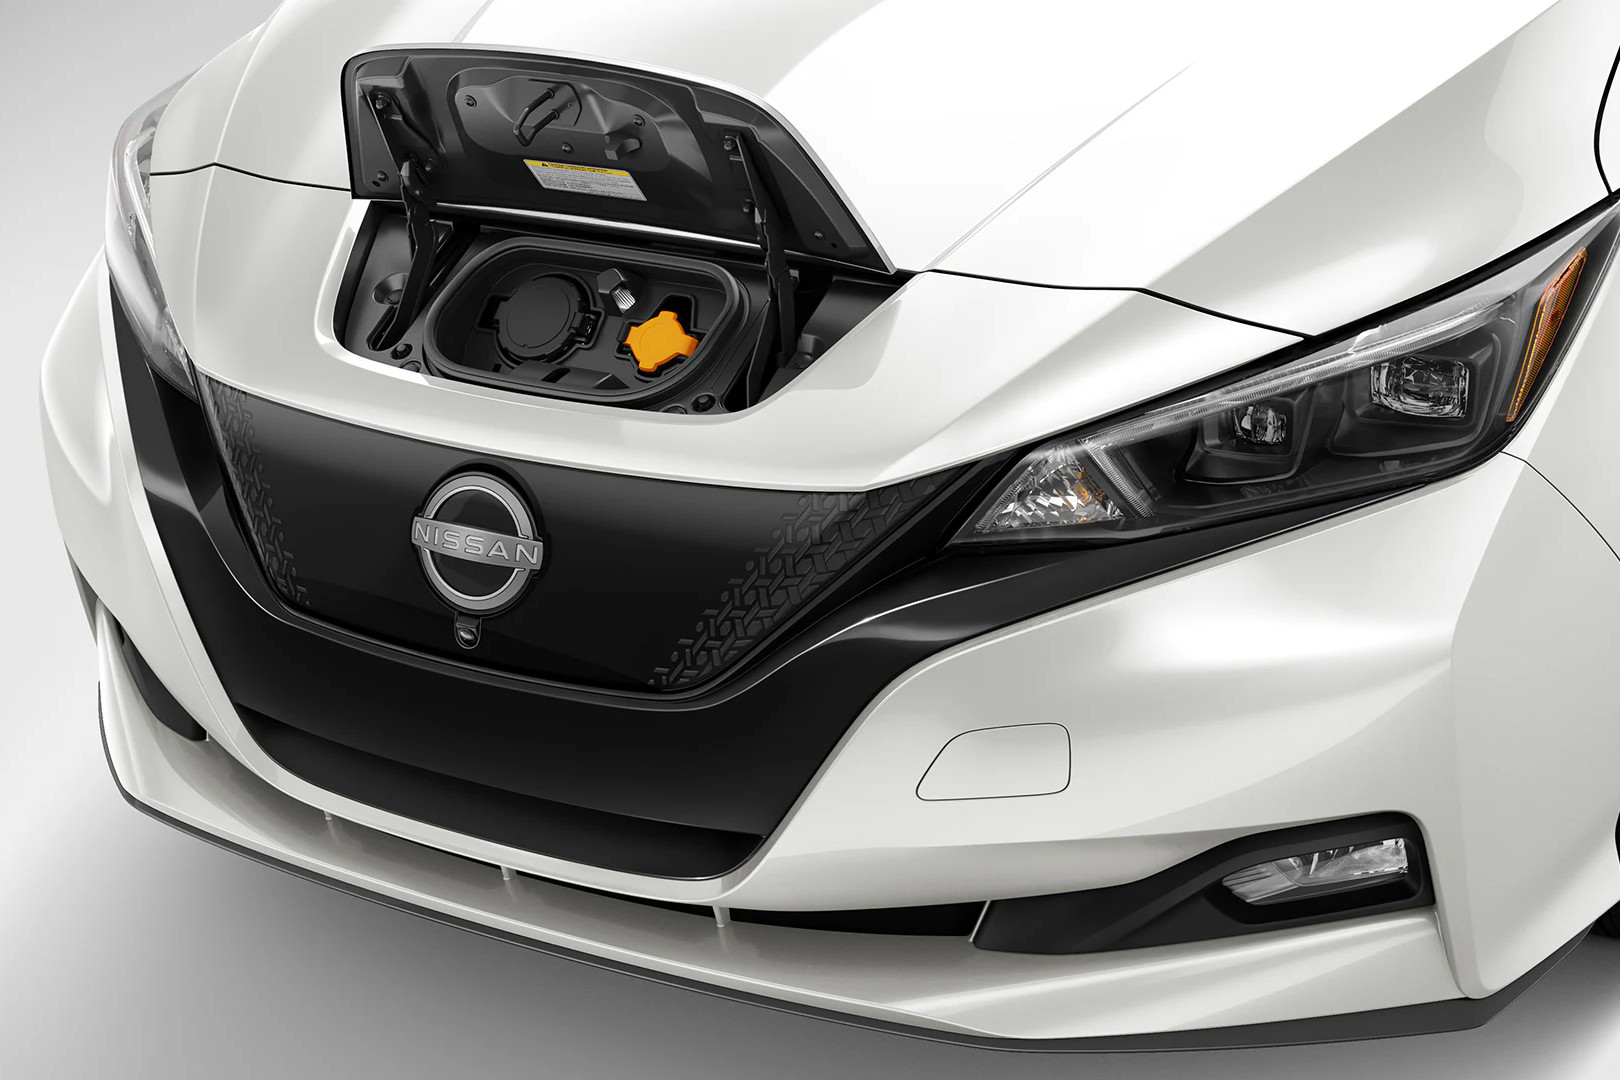 Nissan's 2024 Leaf uses the CCS charging standard, but it has announced it will switch to Tesla's NACS charging plug in 2025.